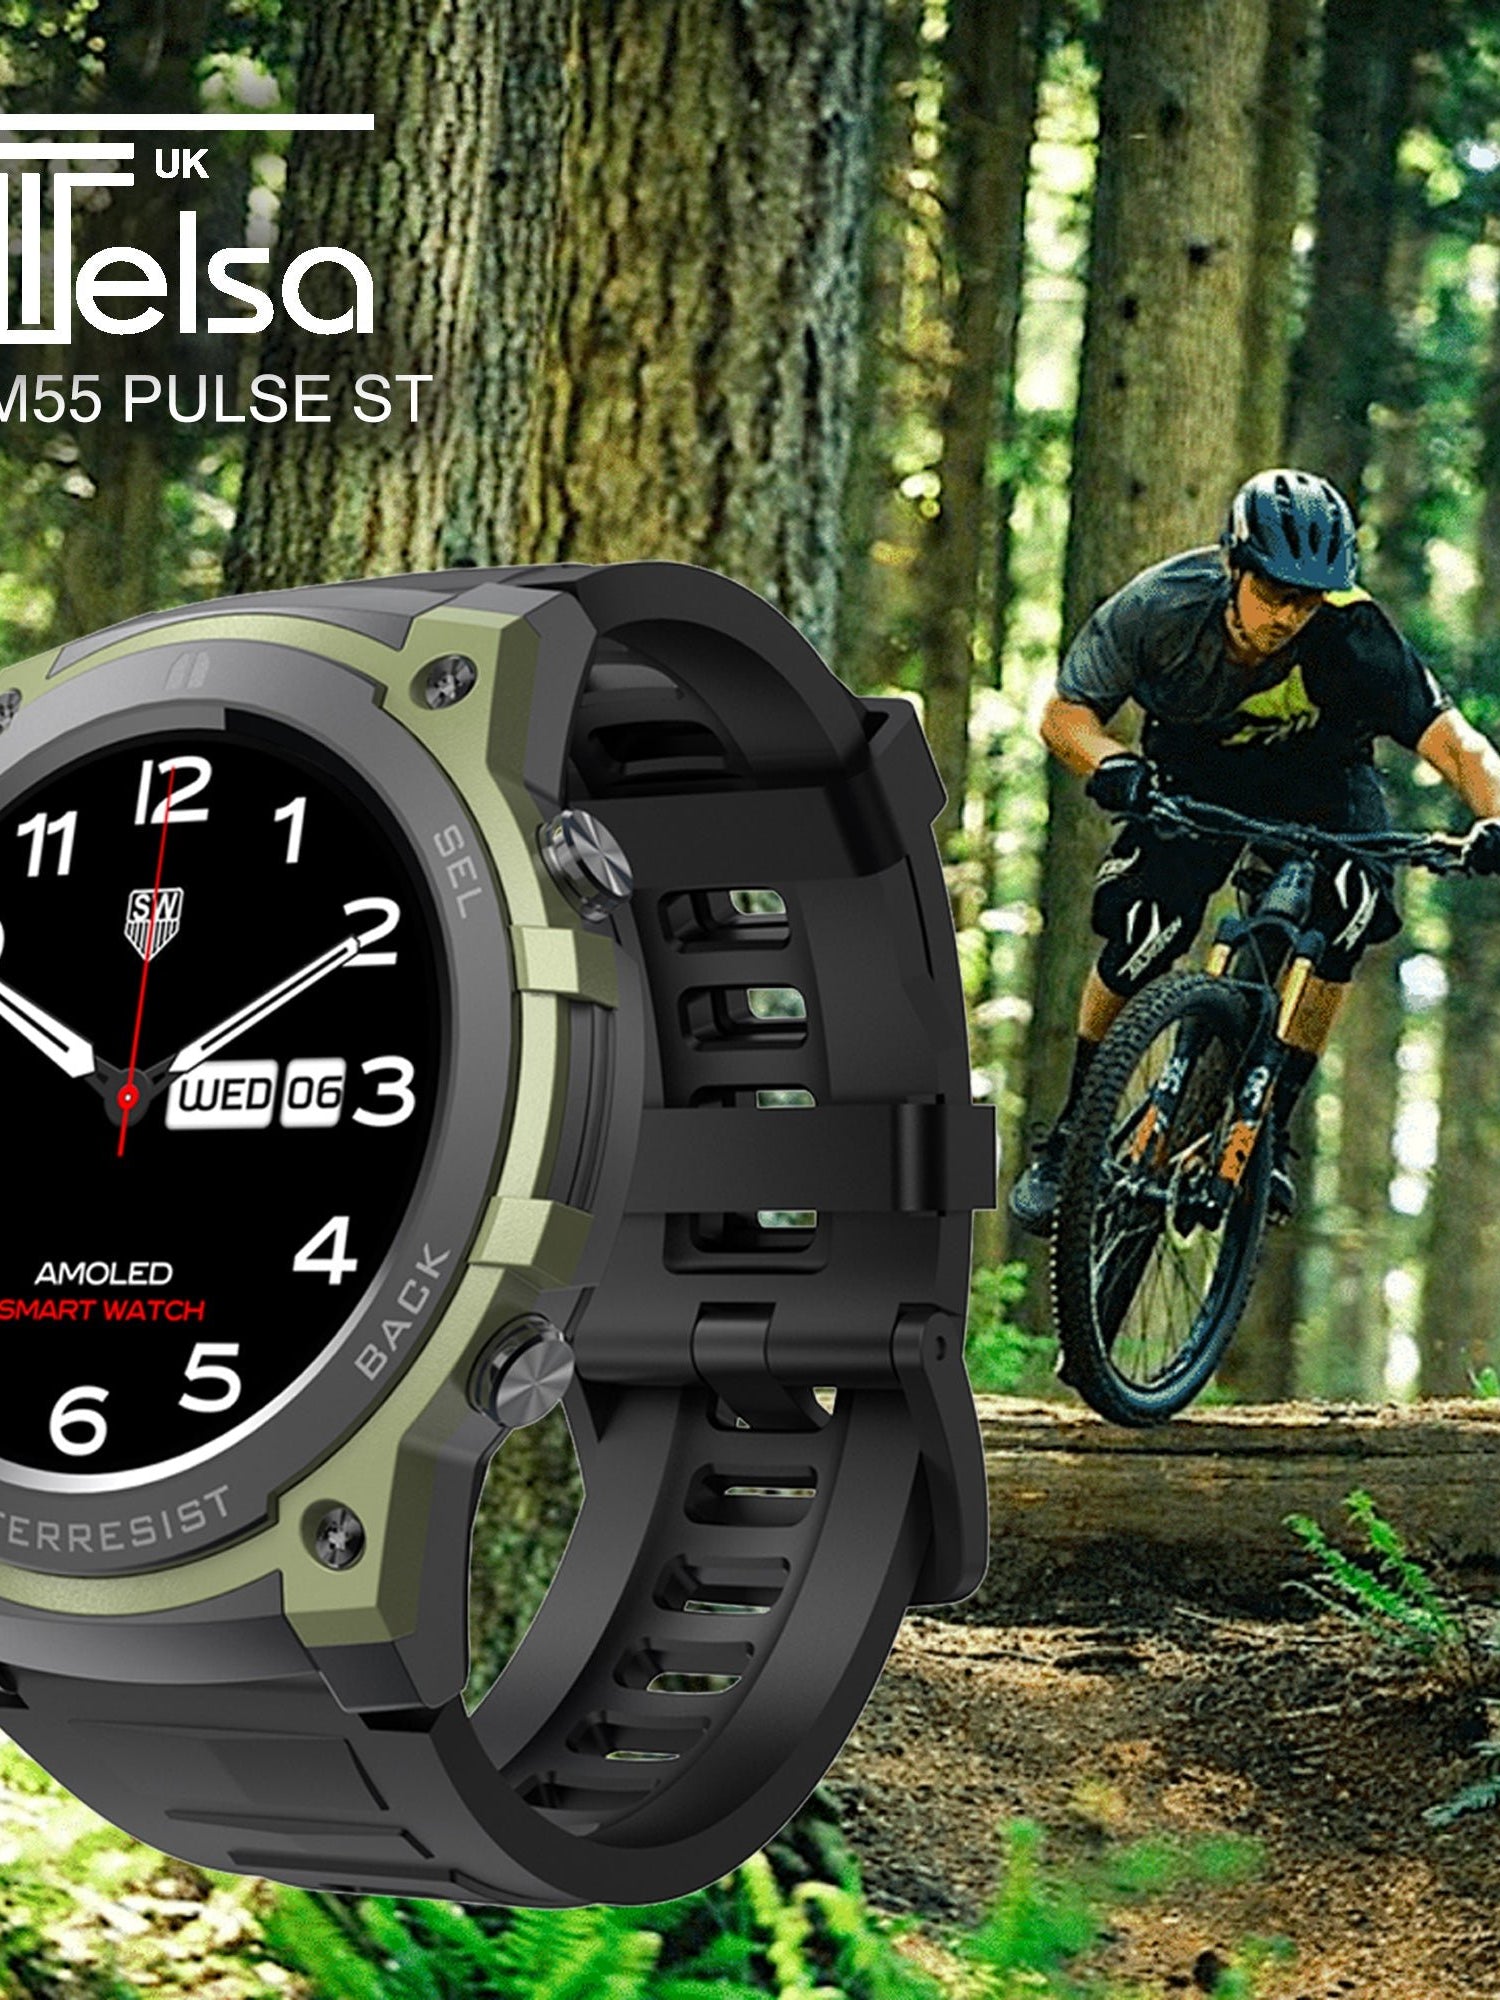 4elementsclothing Telsa DM55 Pulse AMOLED touchscreen IP68 Waterproof - Smart Watch for Men Women, 1.43" Smartwatch, Fitness Watch with Heart Rate Sleep Monitor, Step Counter, 100+ Sports, Fitness Smartwatches / Android IOSWatch